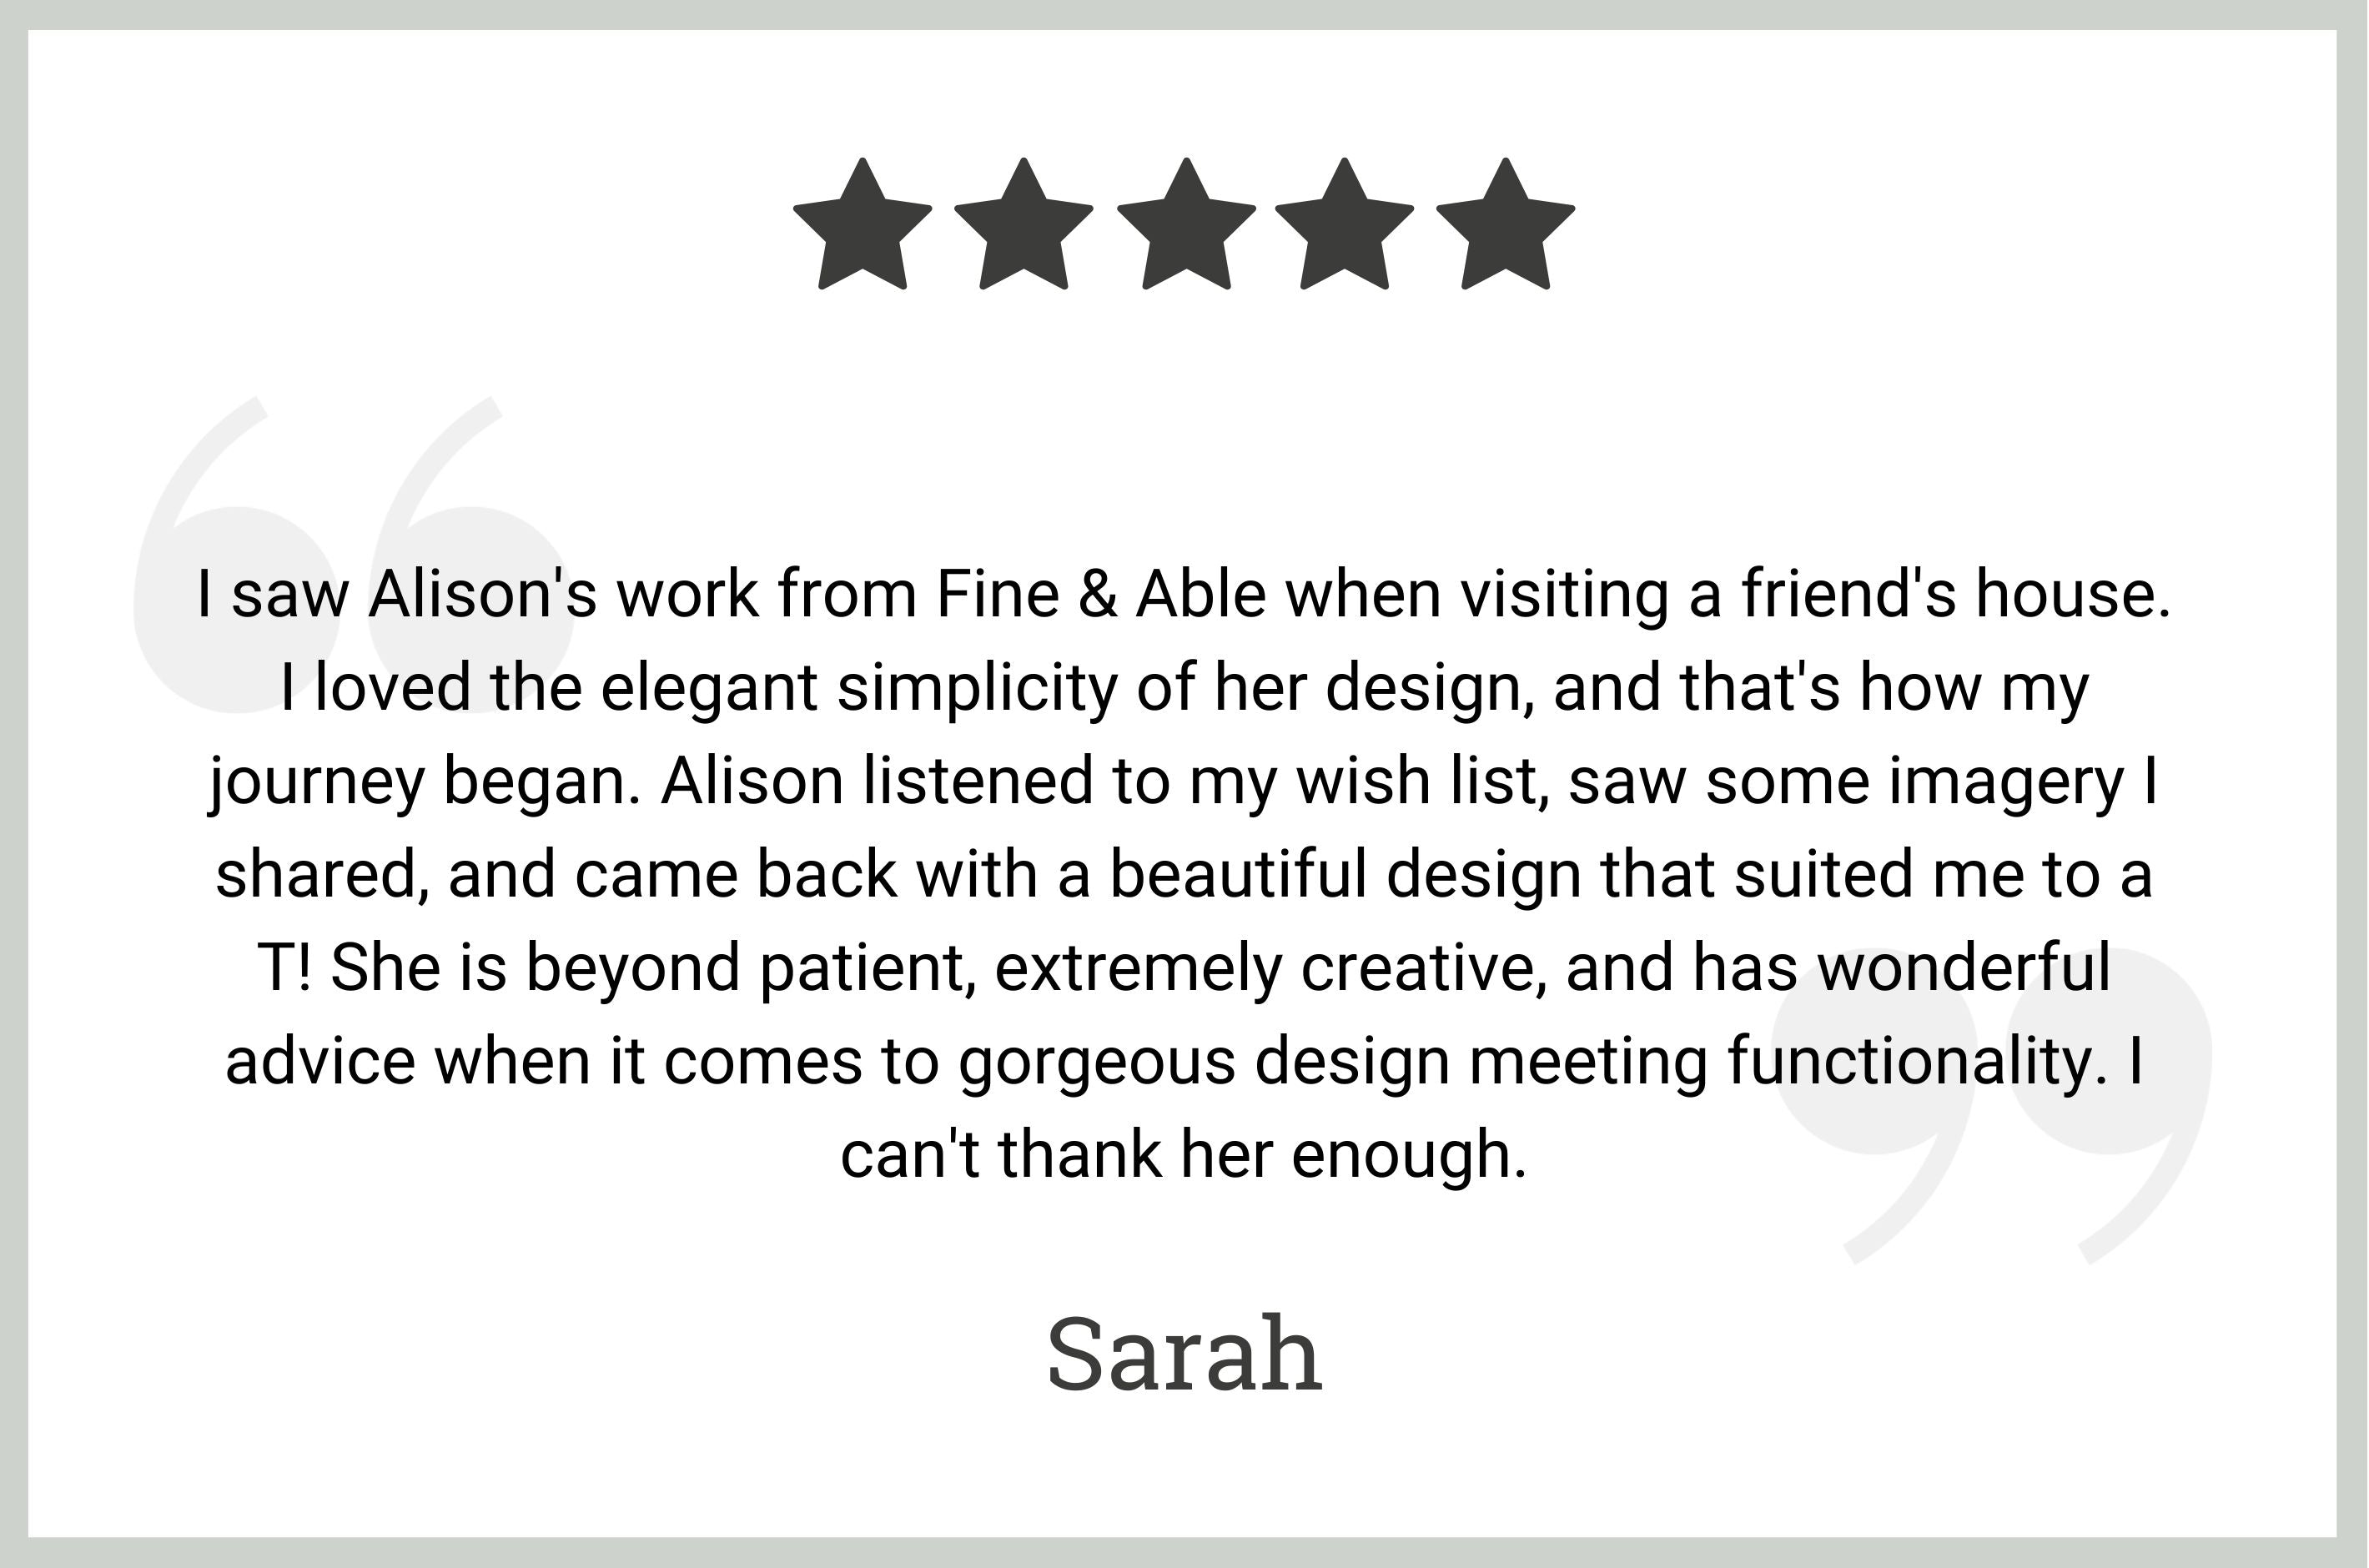 5 star review by Sarah